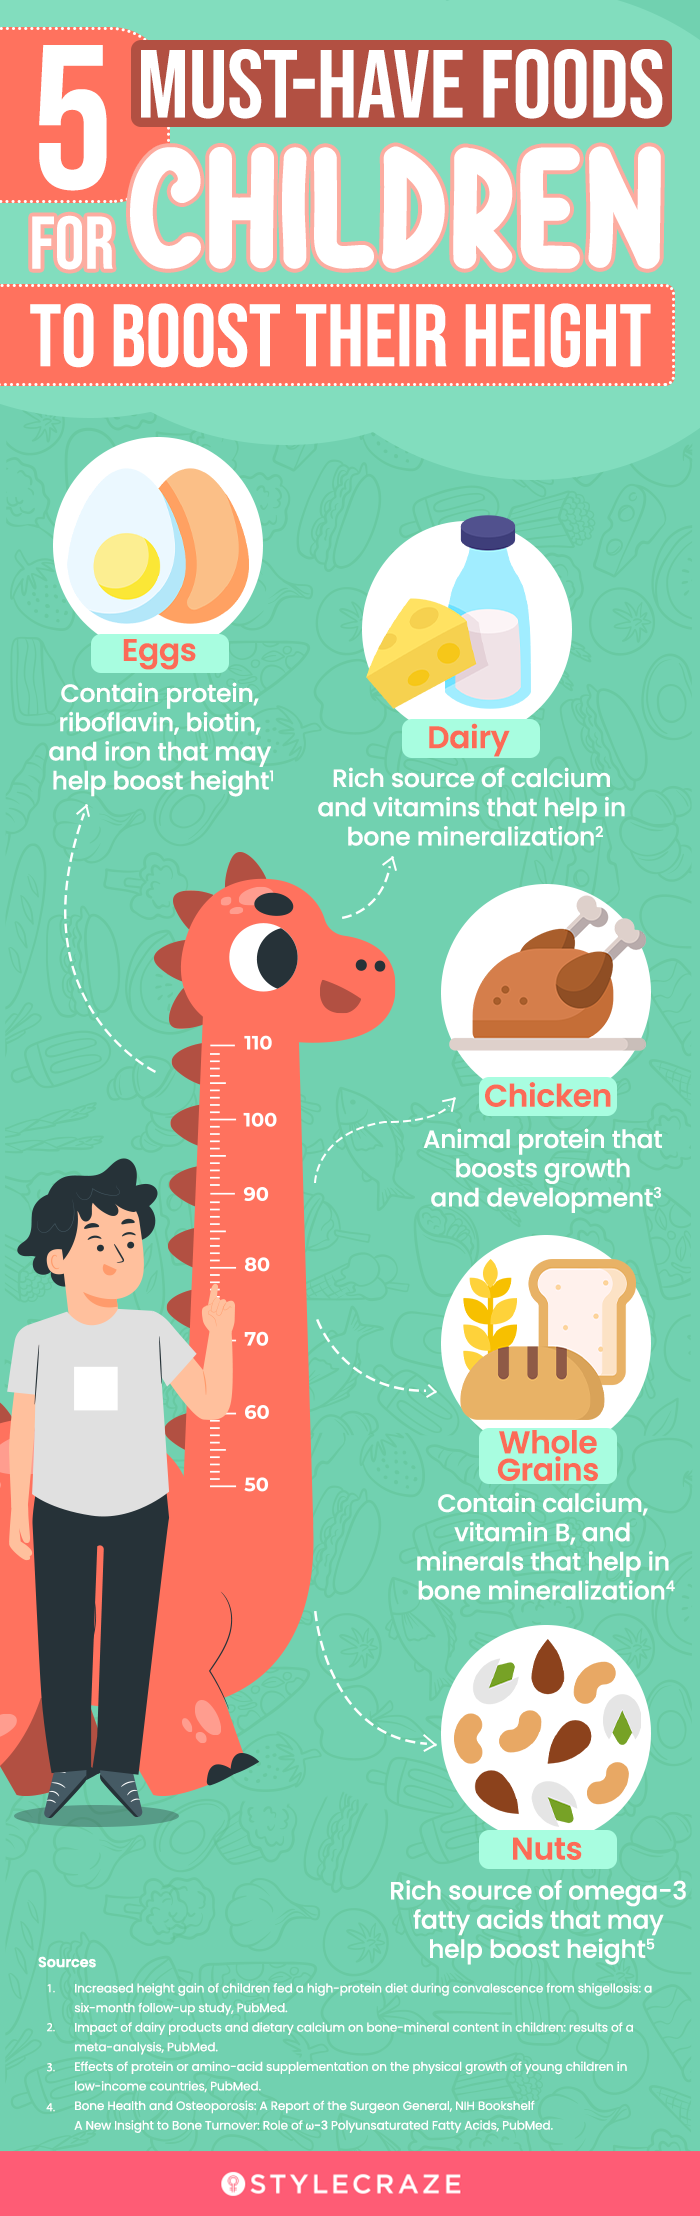 5 must have foods for children to boost their height [infographic]